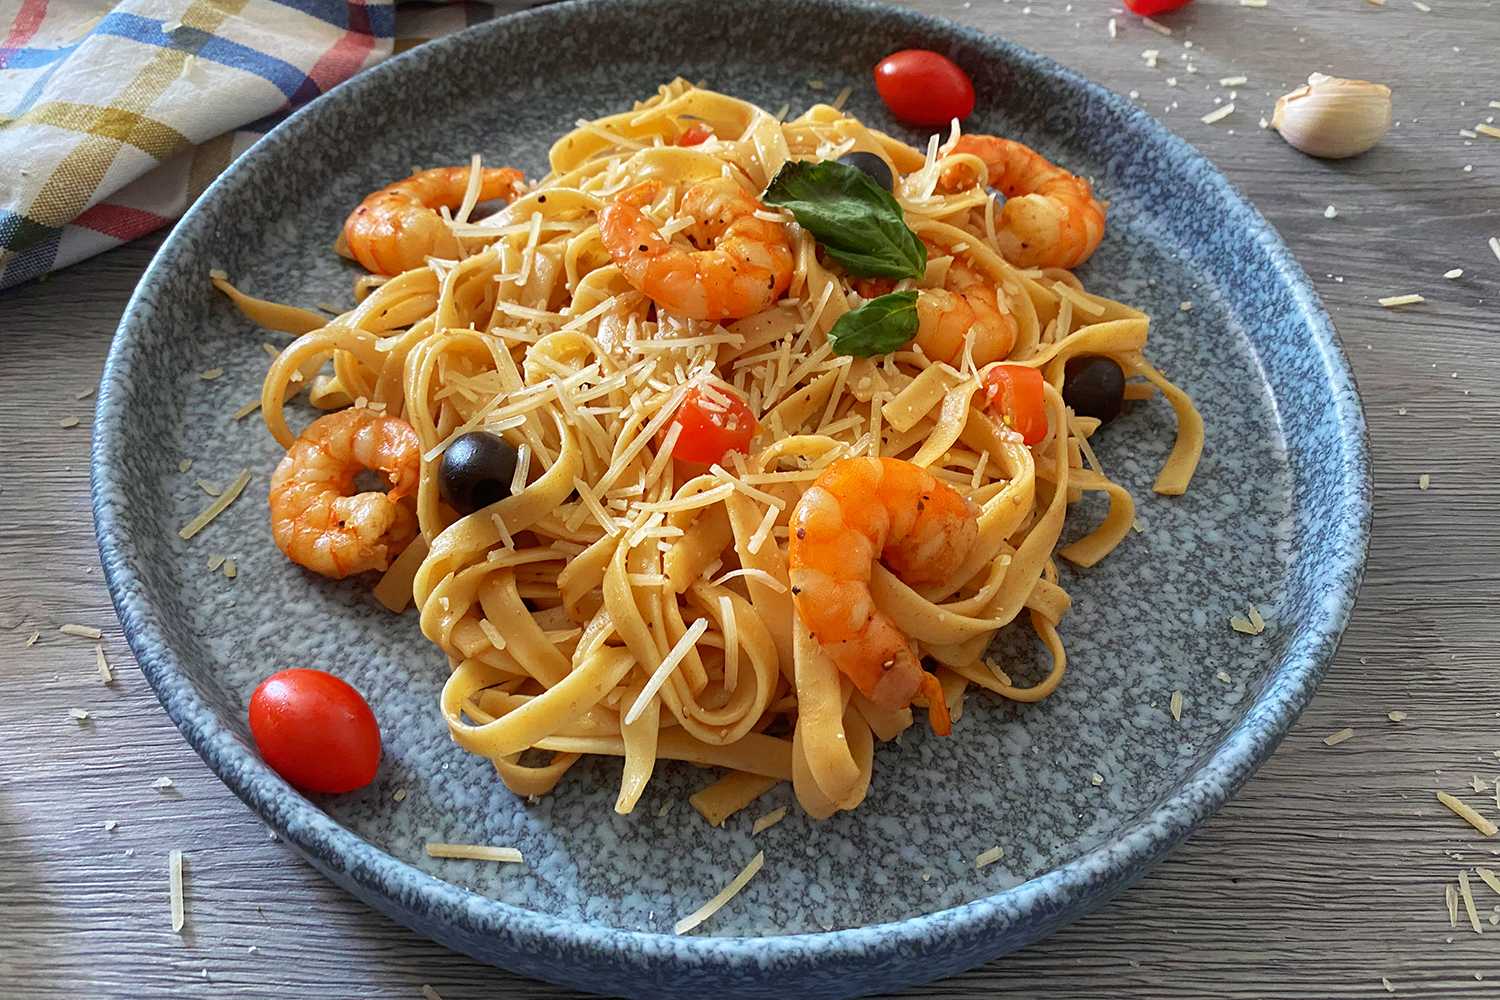 Cooked fettuccine noodles mixed with shrimp, black olives, cherry tomatoes and melted cheese on top